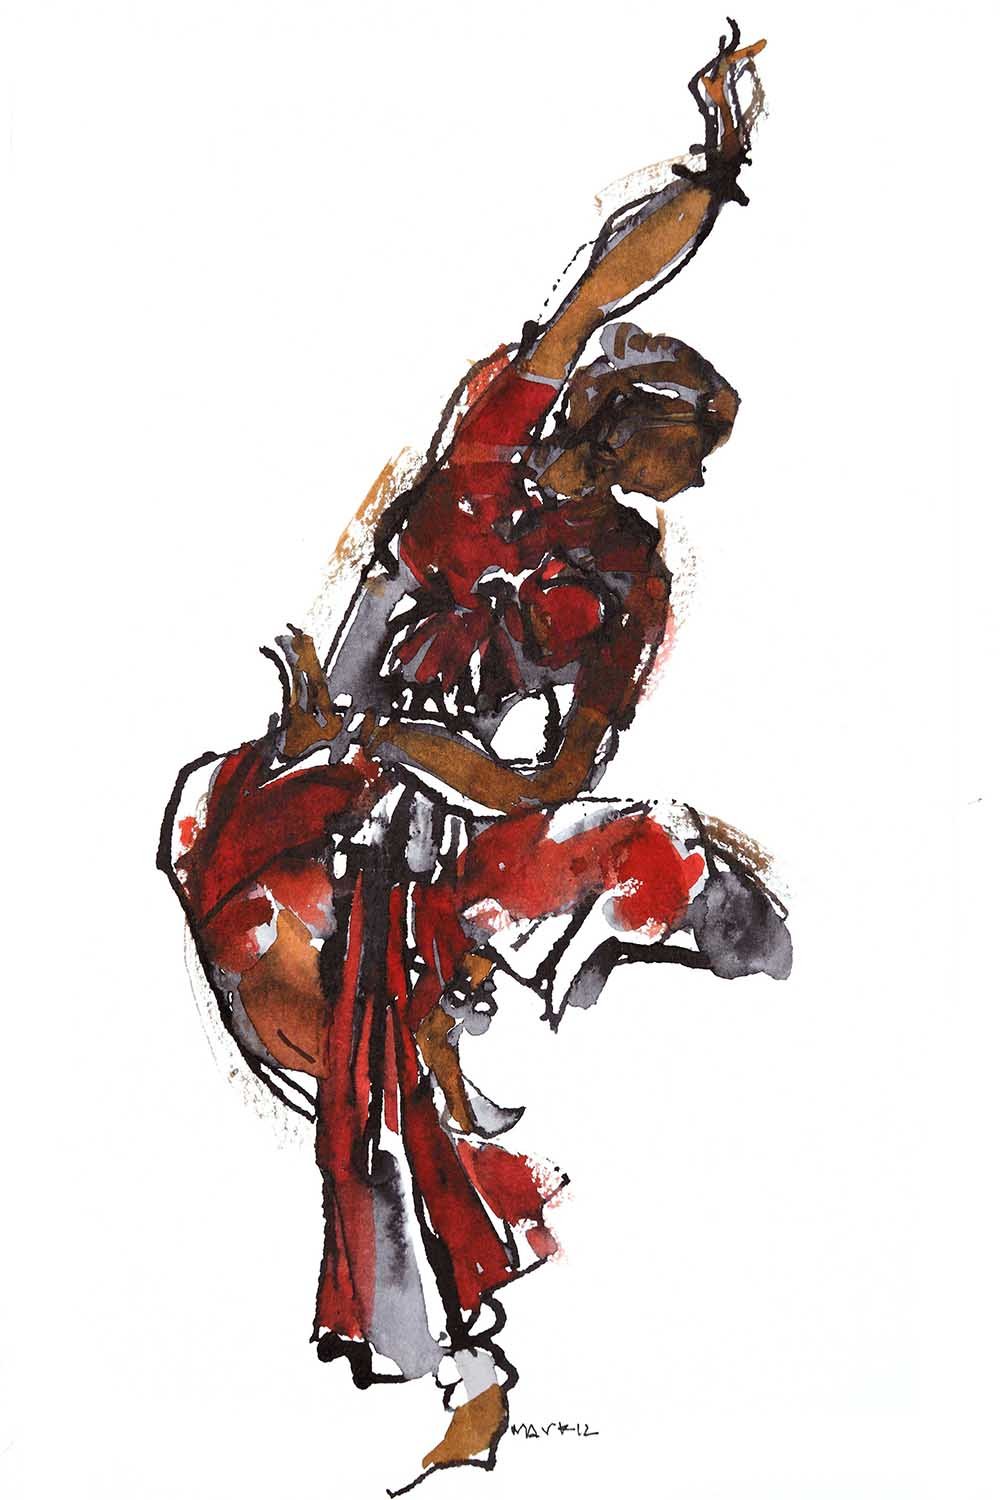 Performer 278|S. Mark Rathinaraj- Pen and Ink on Paper, , 8.5 x 5.5 inches